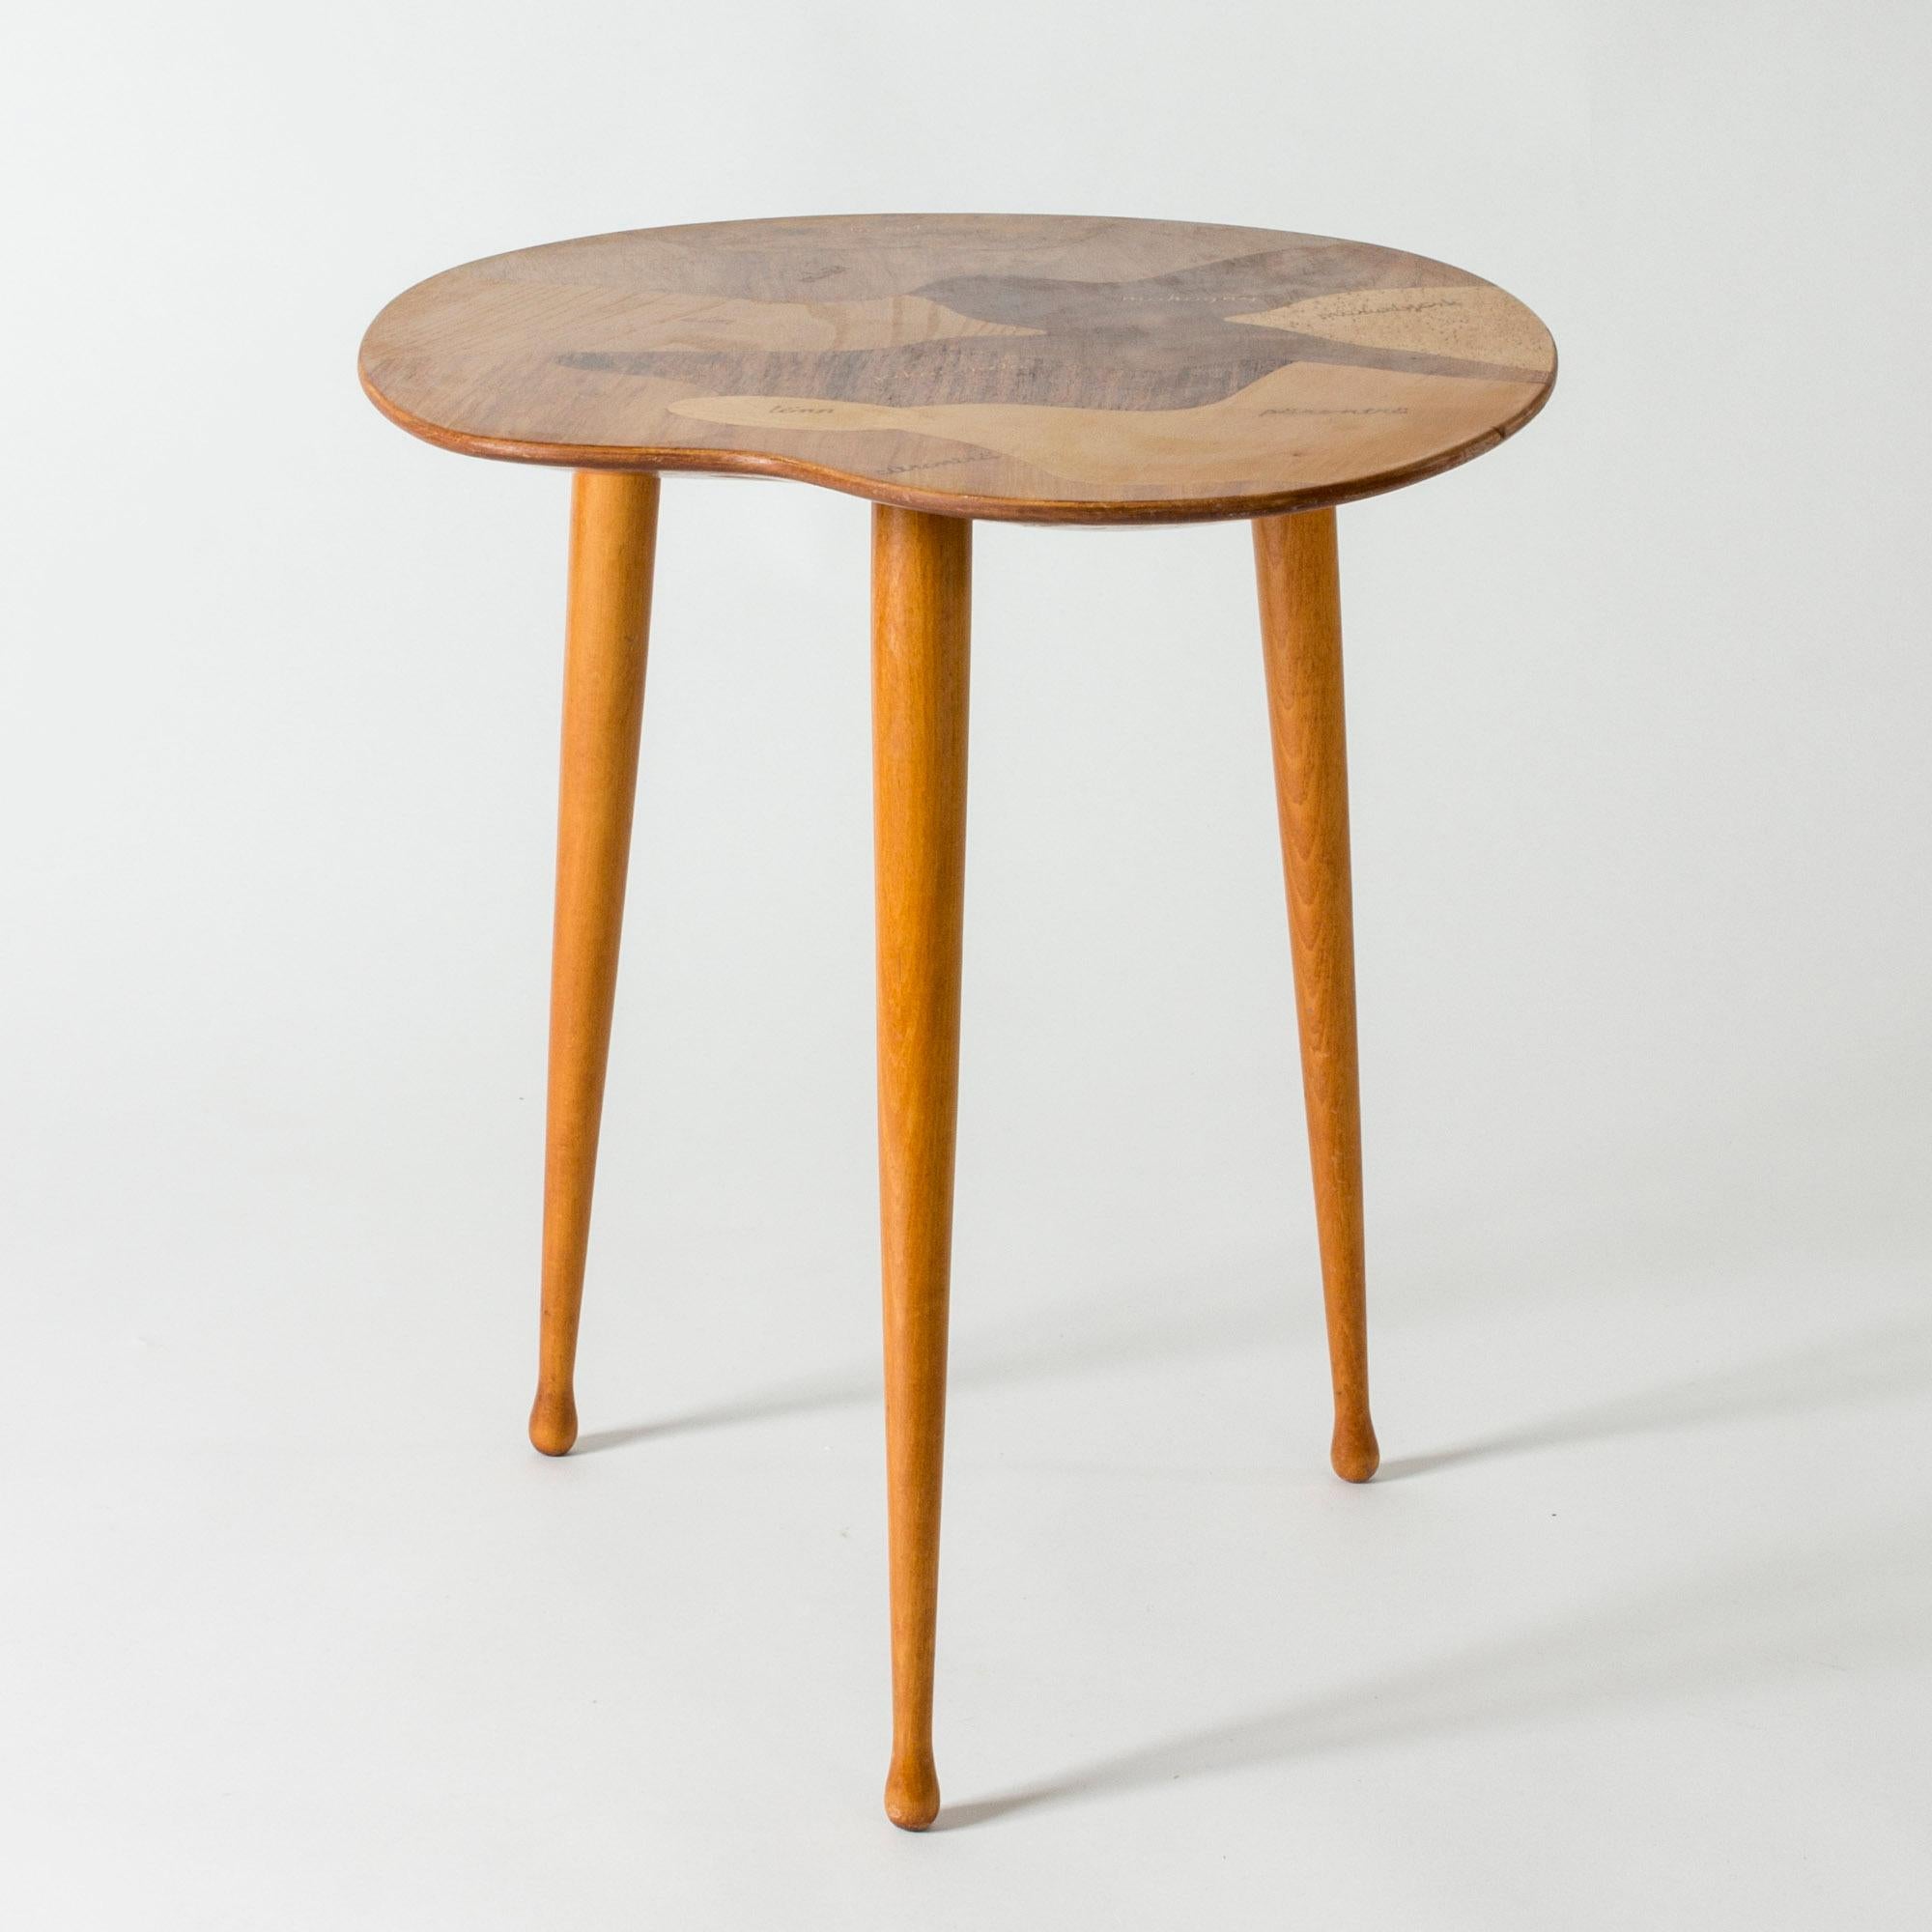 Scandinavian Modern Midcentury Side Table with Inlays, Sweden, 1950s For Sale